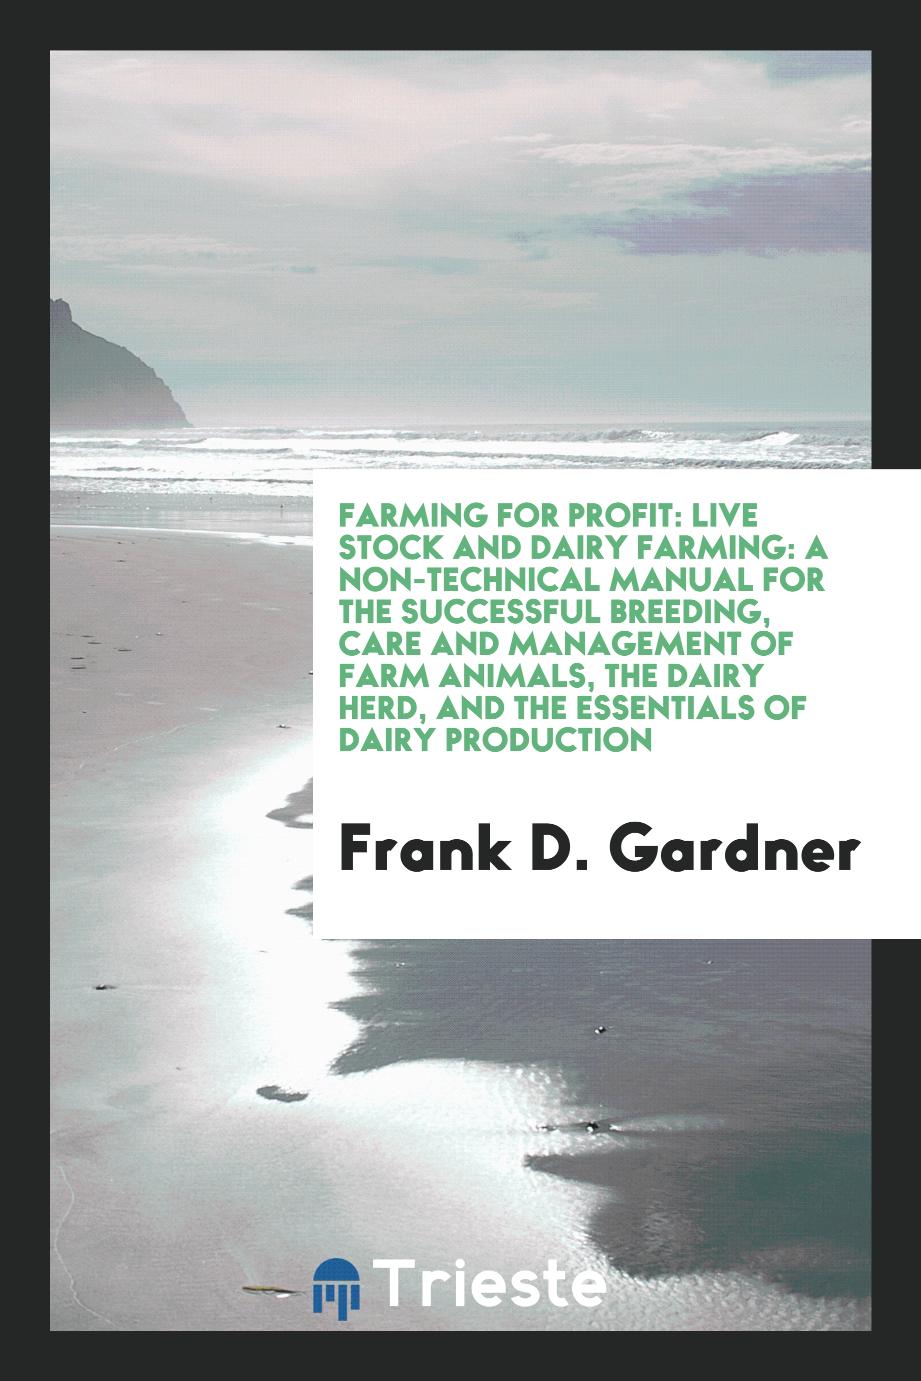 Farming for Profit: Live Stock and Dairy Farming: A Non-Technical Manual for the Successful Breeding, Care and Management of Farm Animals, the Dairy Herd, and the Essentials of Dairy Production